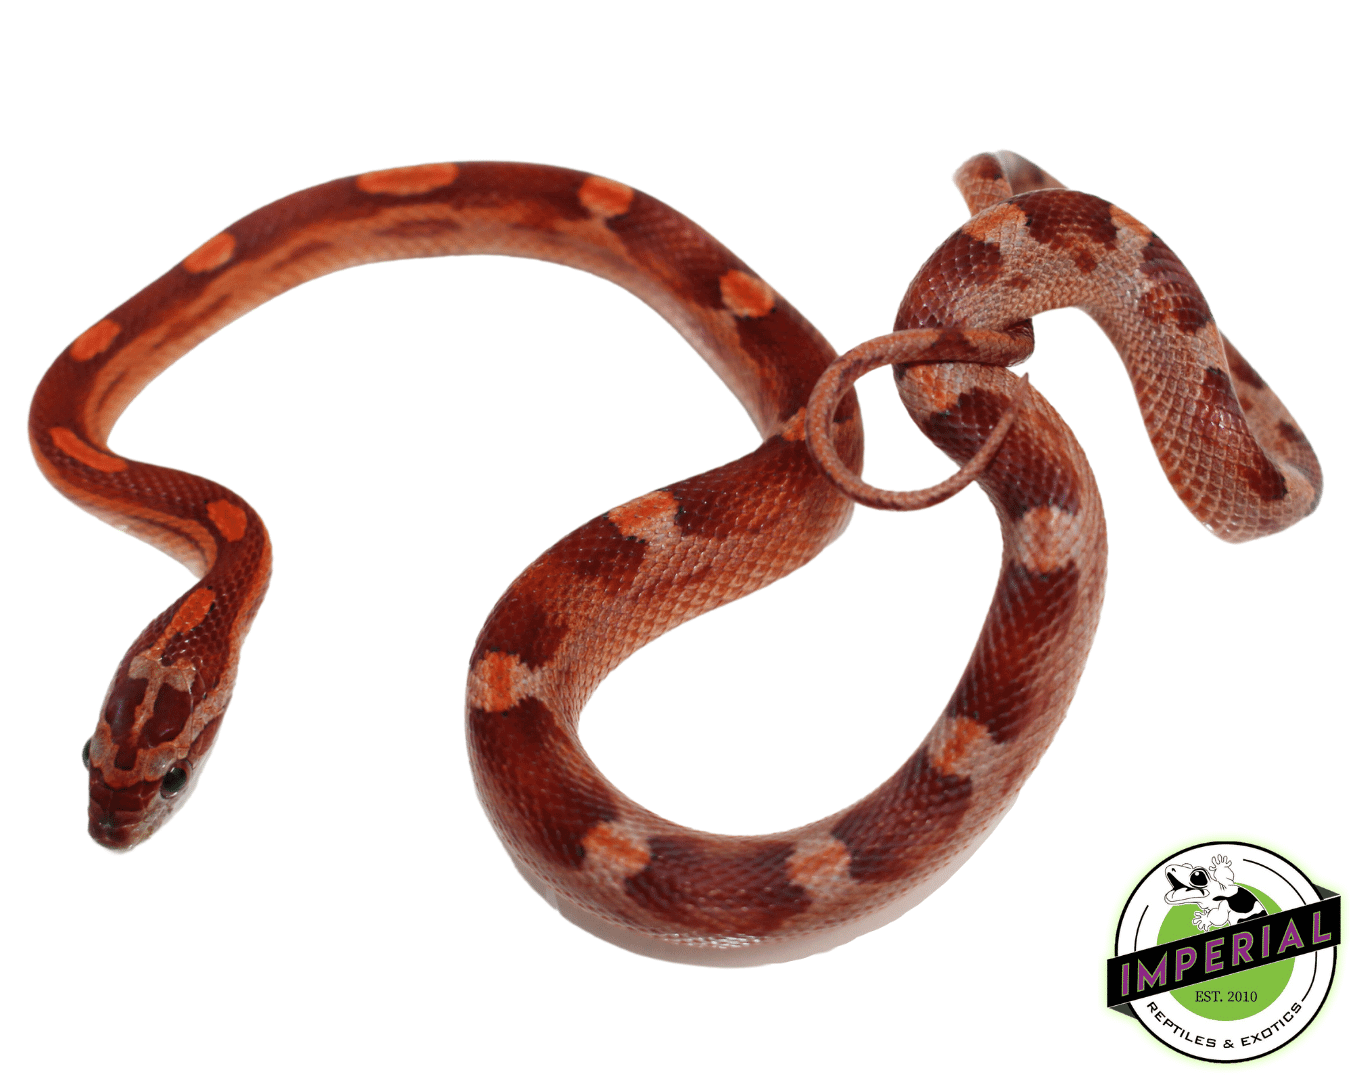 Motley Corn Snake by Imperial Reptiles  Exotics, LLC